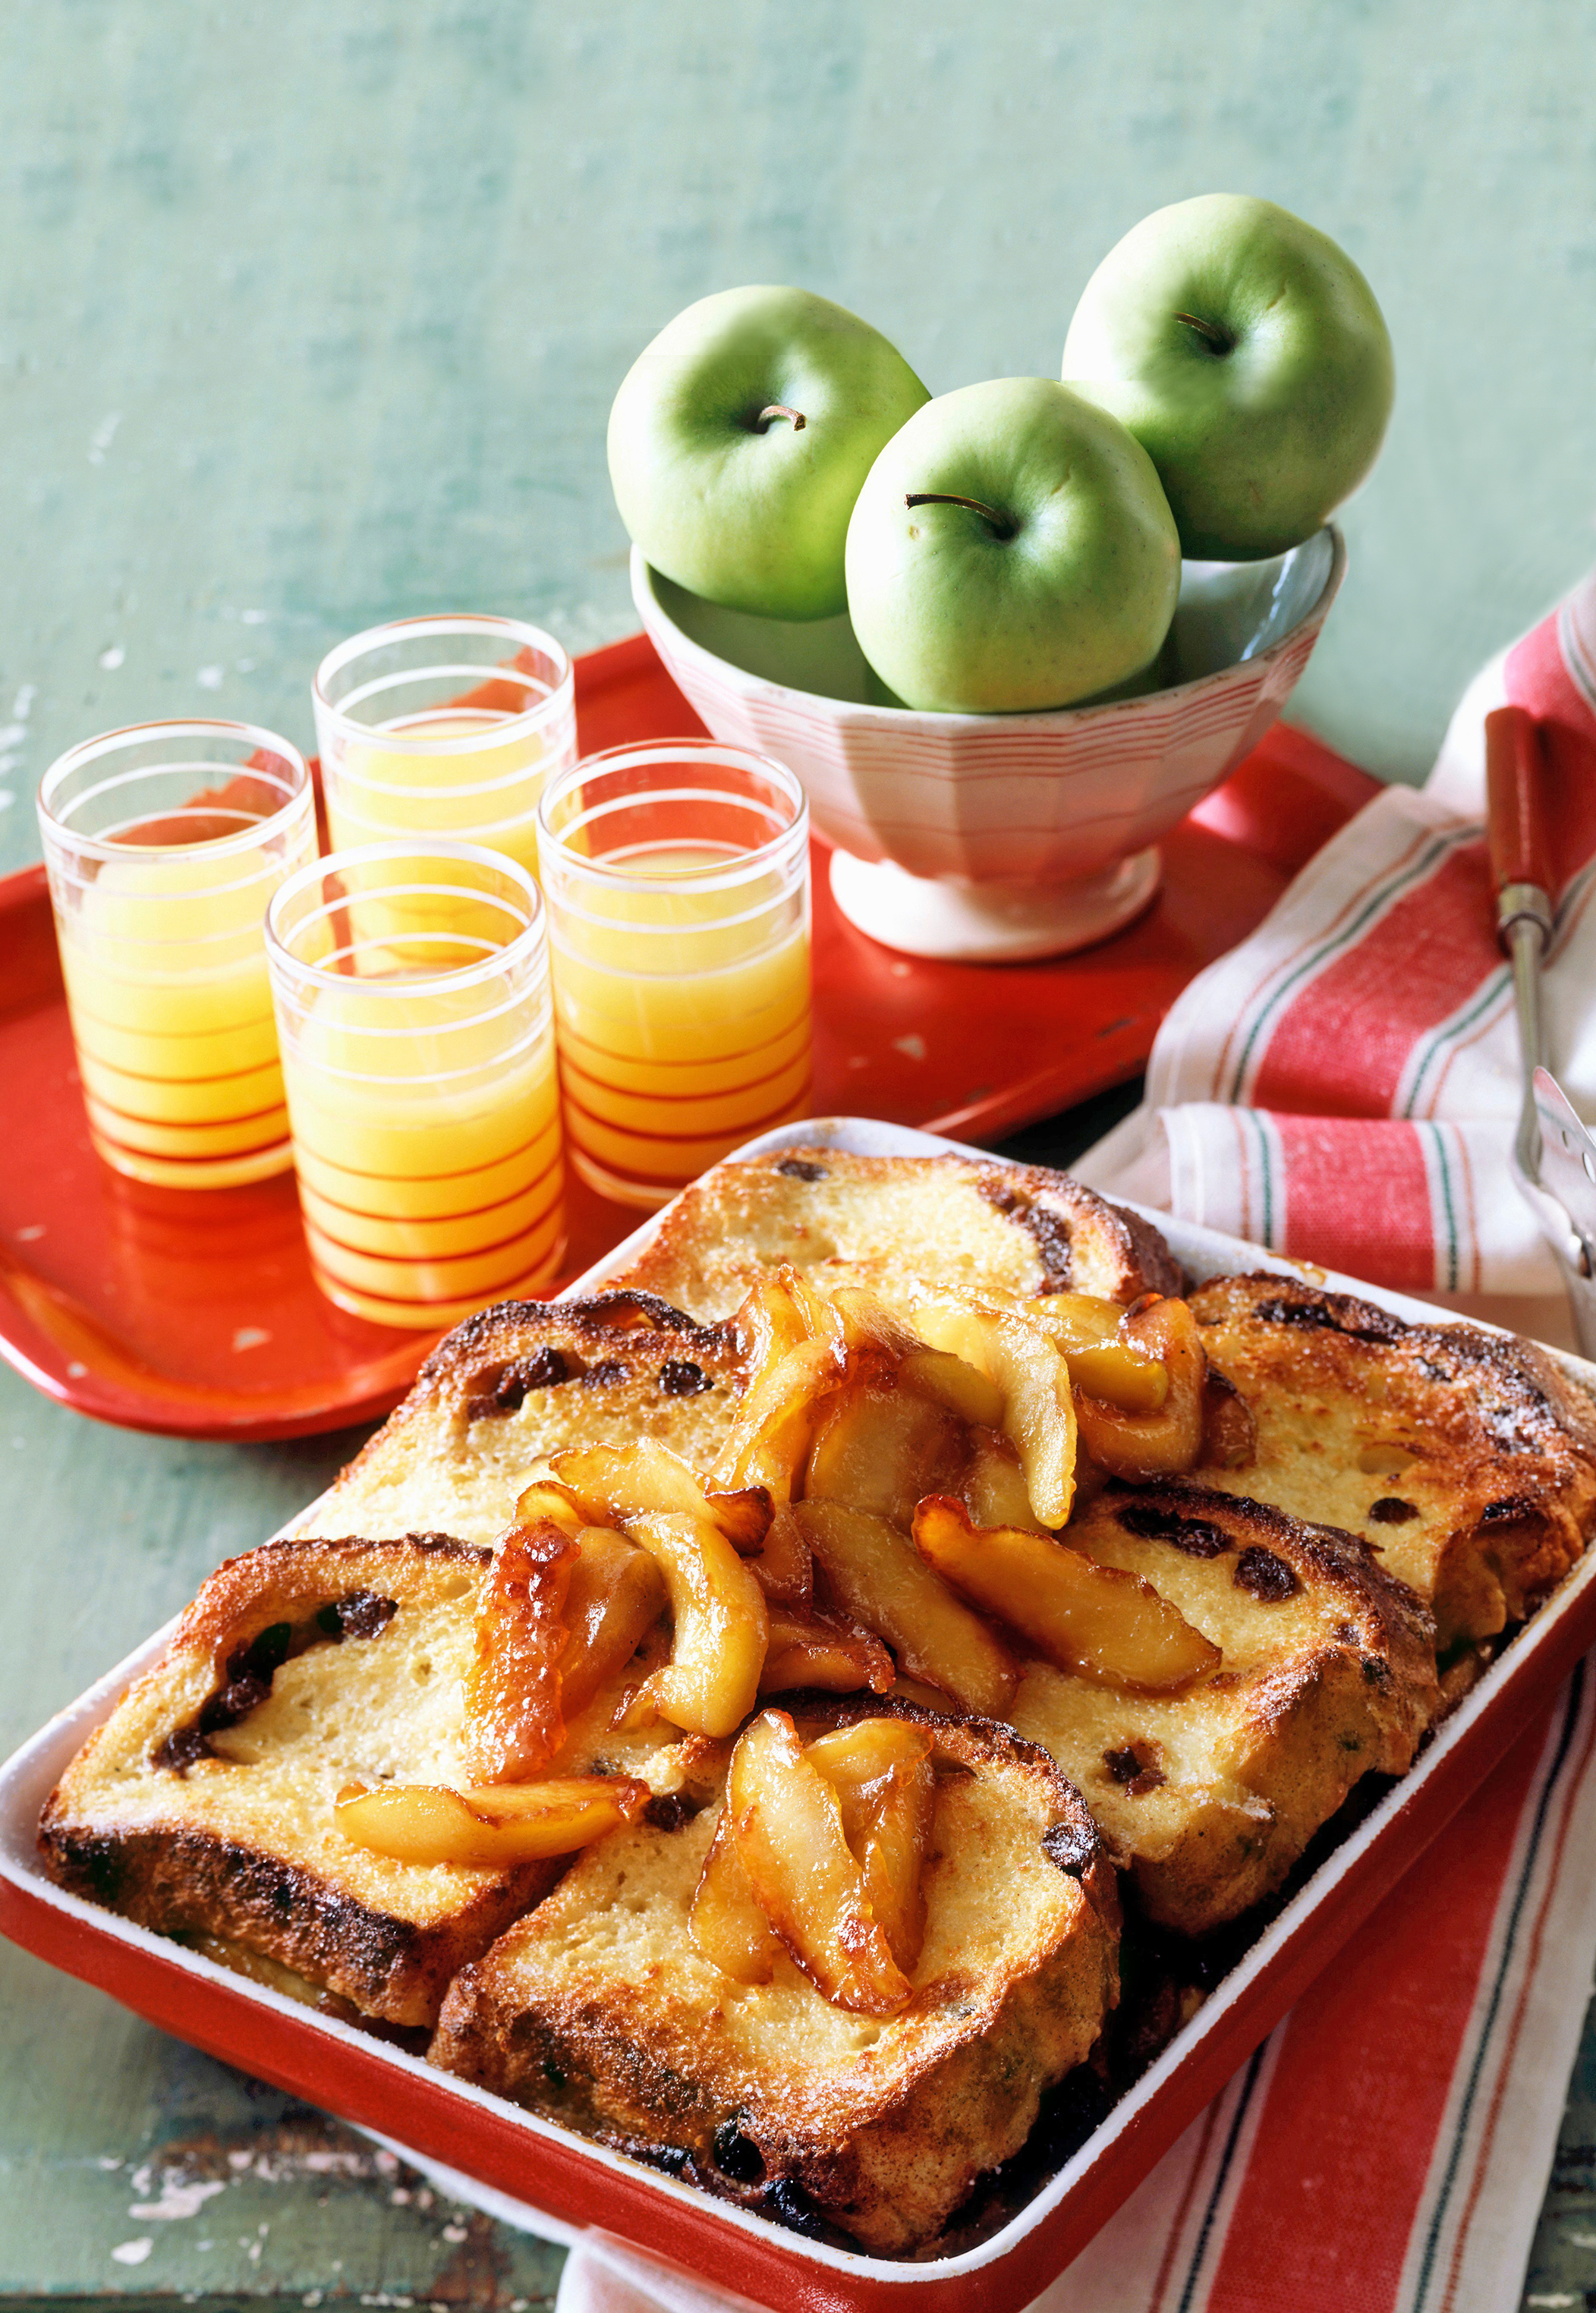 baked apple French toast on a plate next to glasses of orange juice